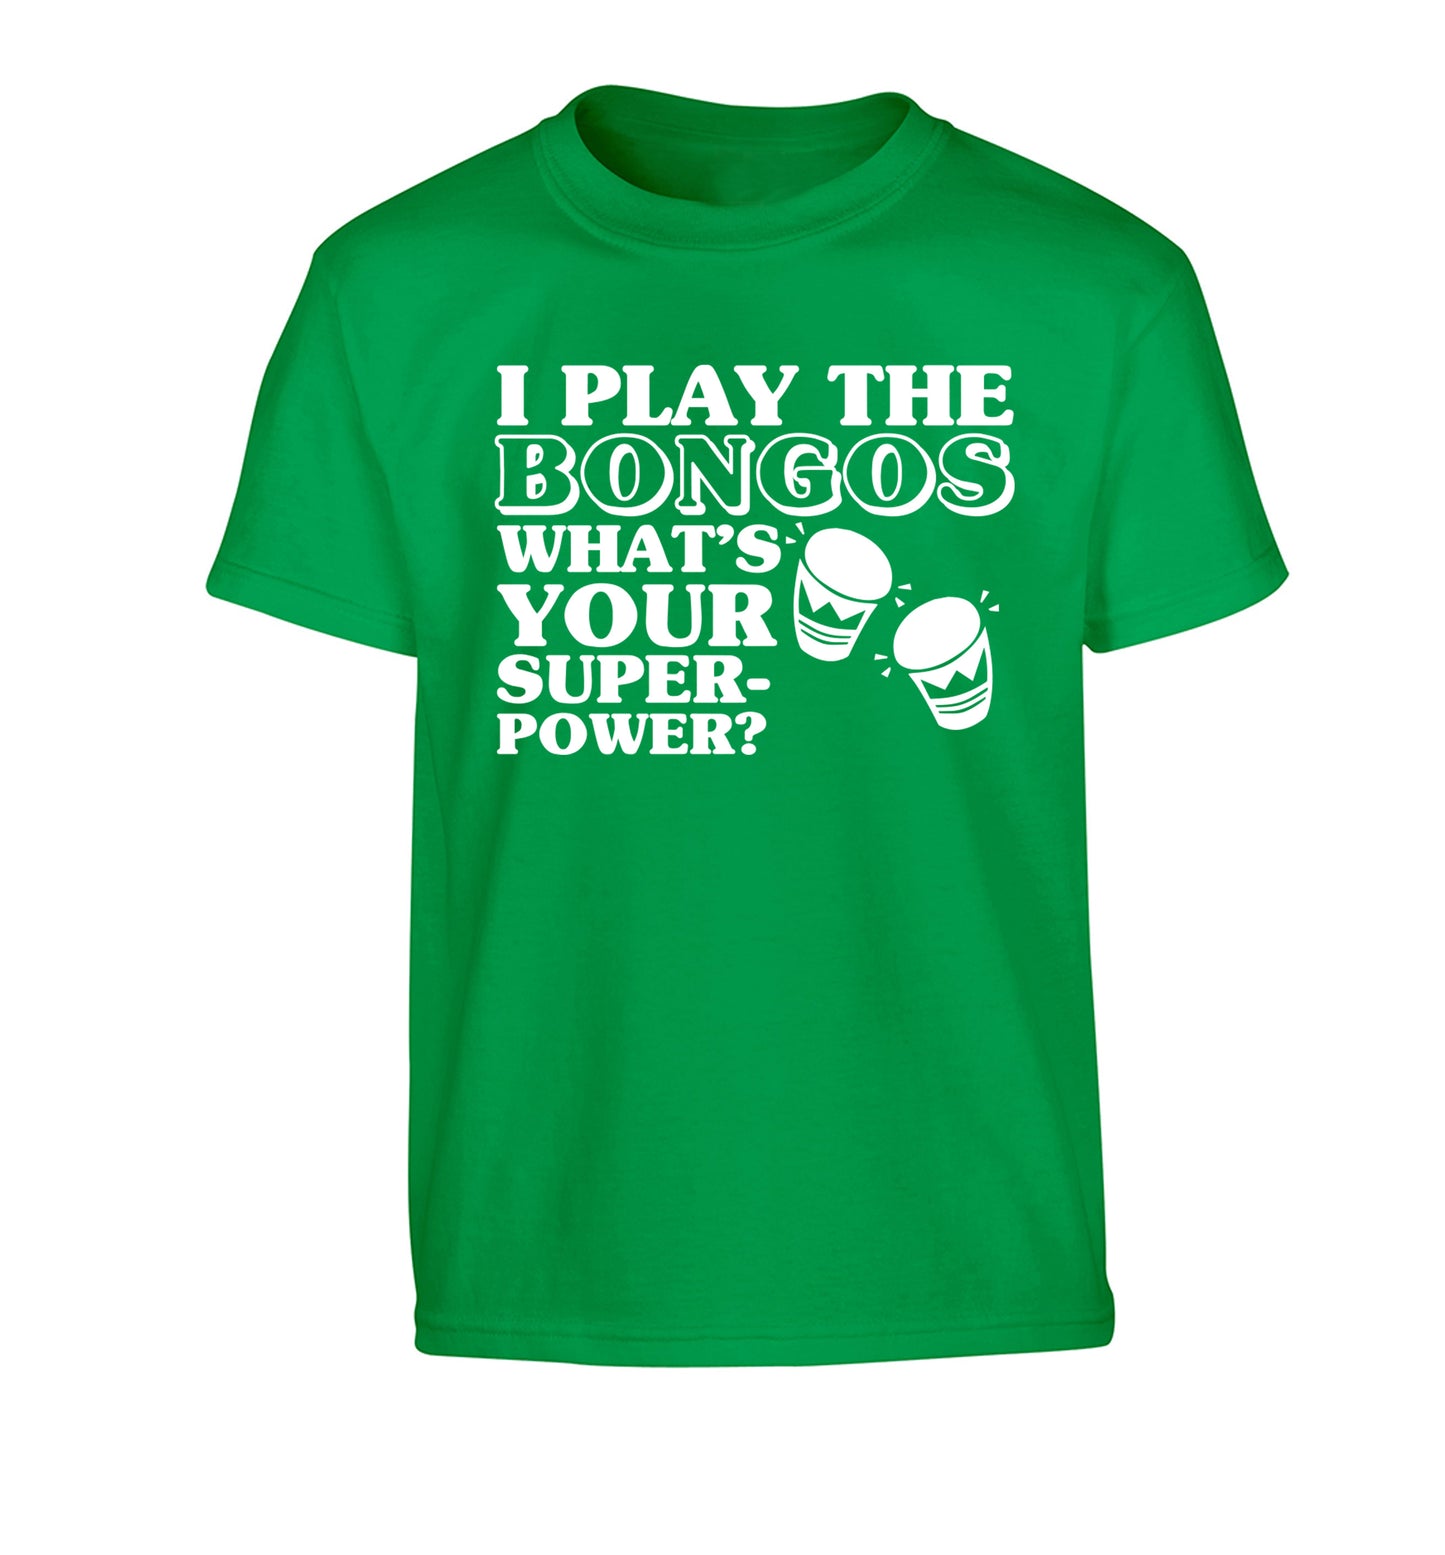 I play the bongos what's your superpower? Children's green Tshirt 12-14 Years